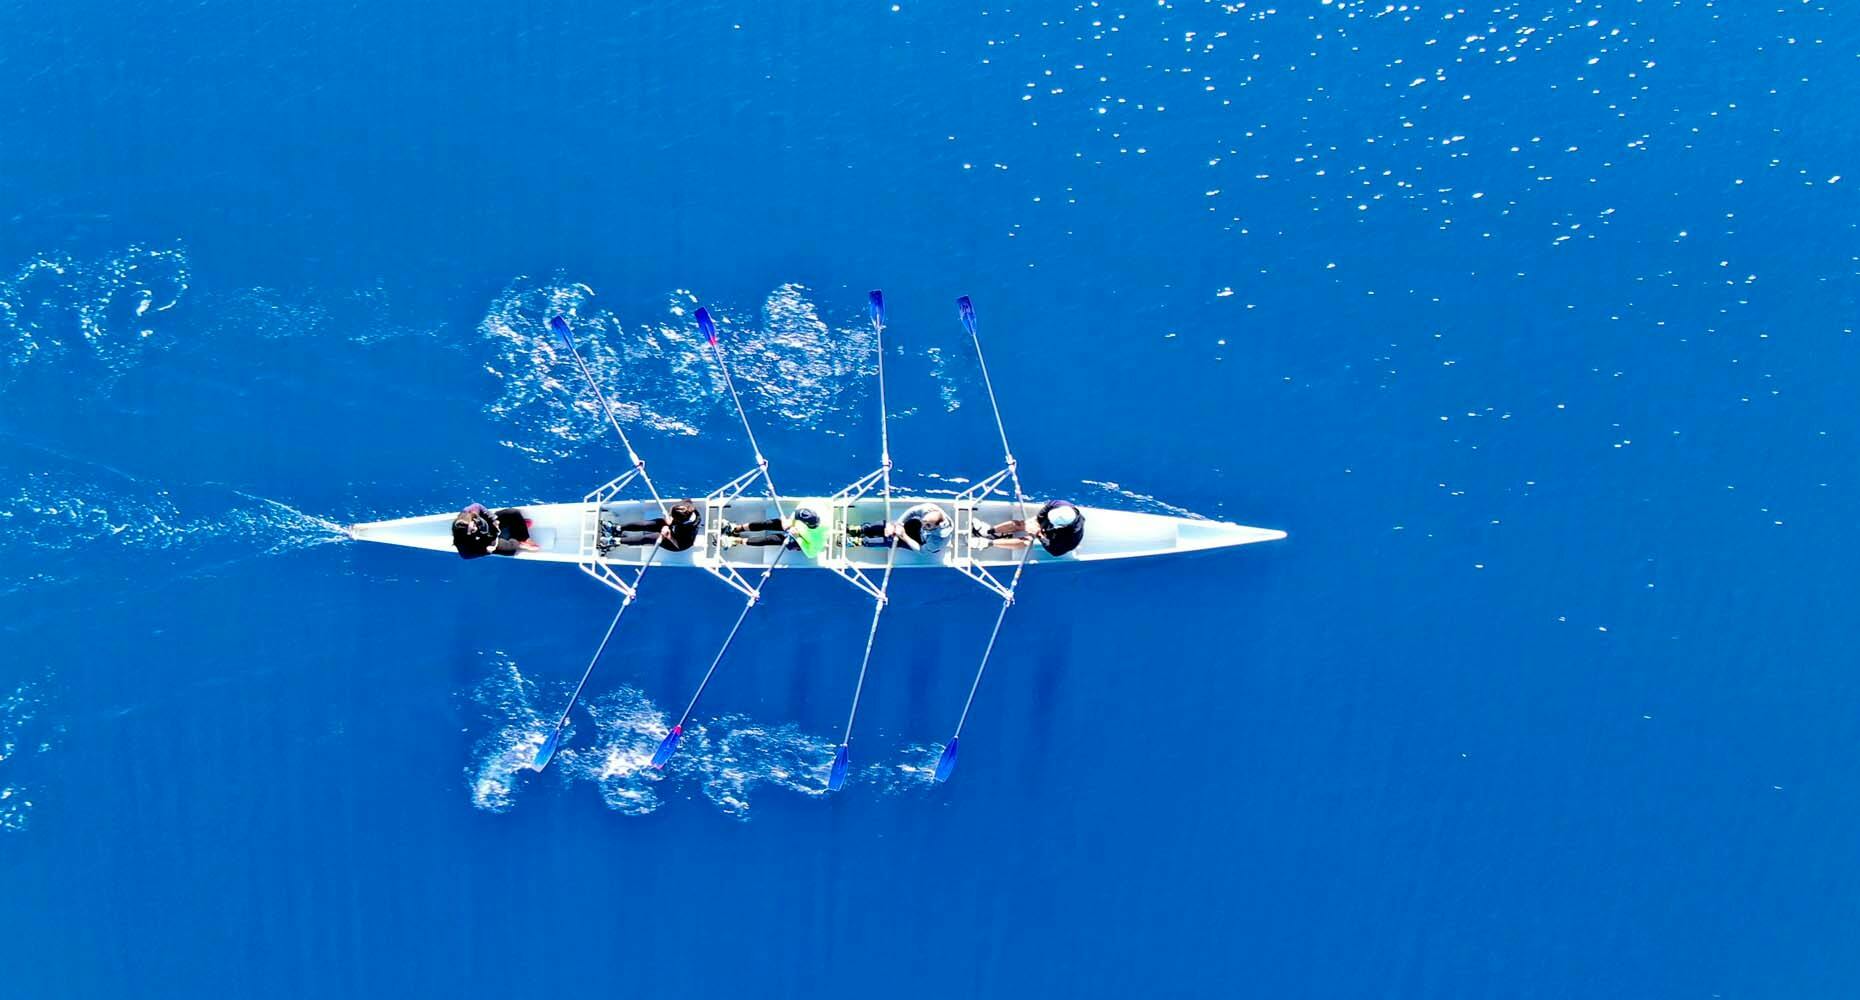 Crew rowers seen from above